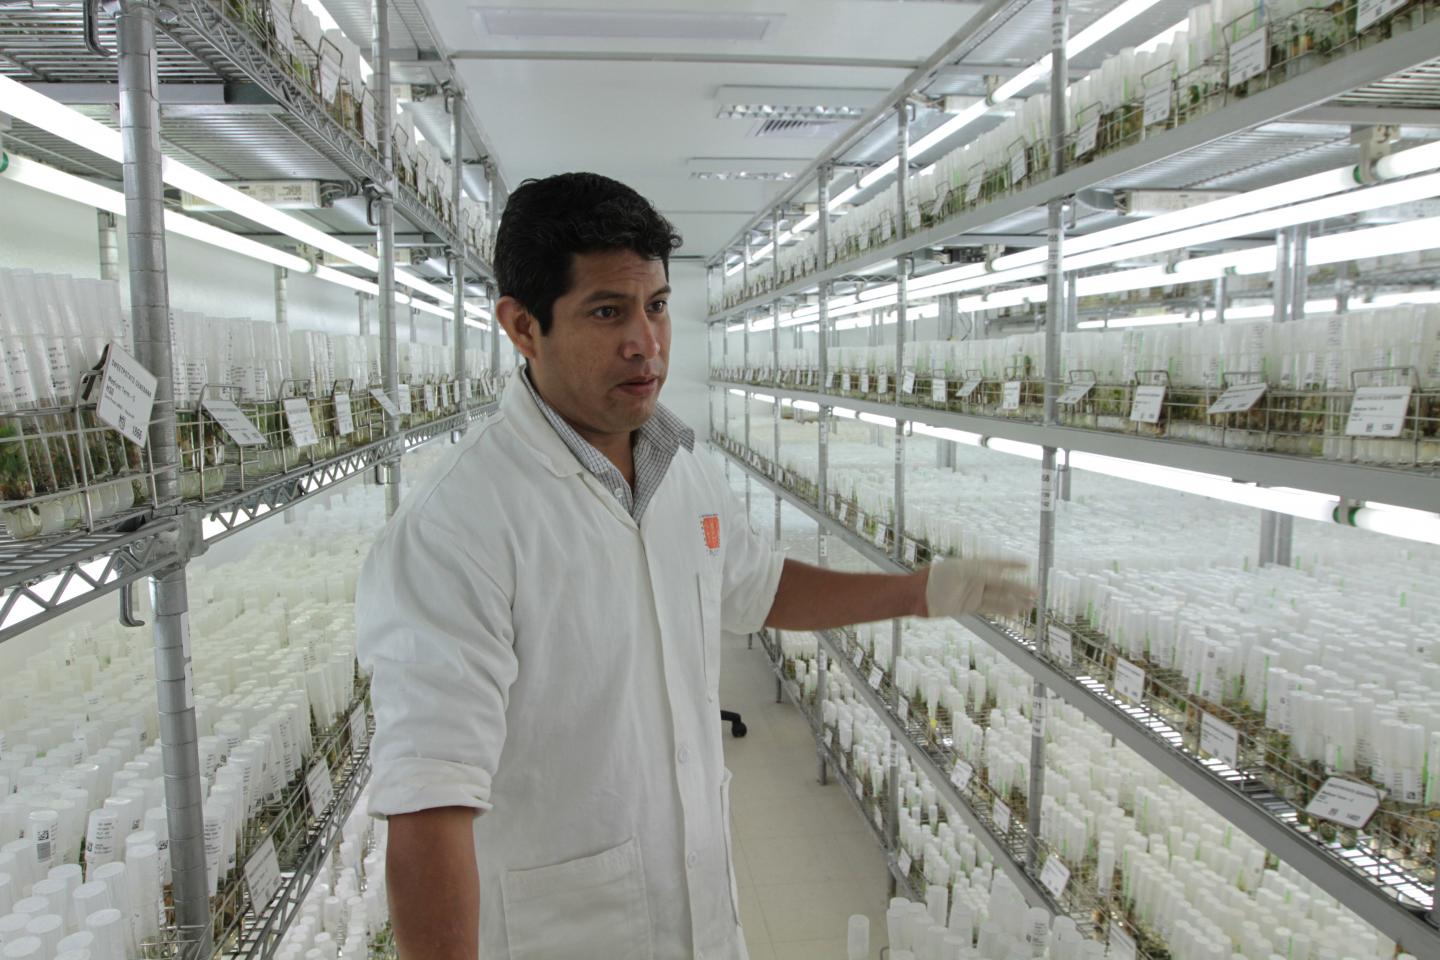 CIP's Genebank Conserves More Than 4,000 Varieties of Potato for Future Generations